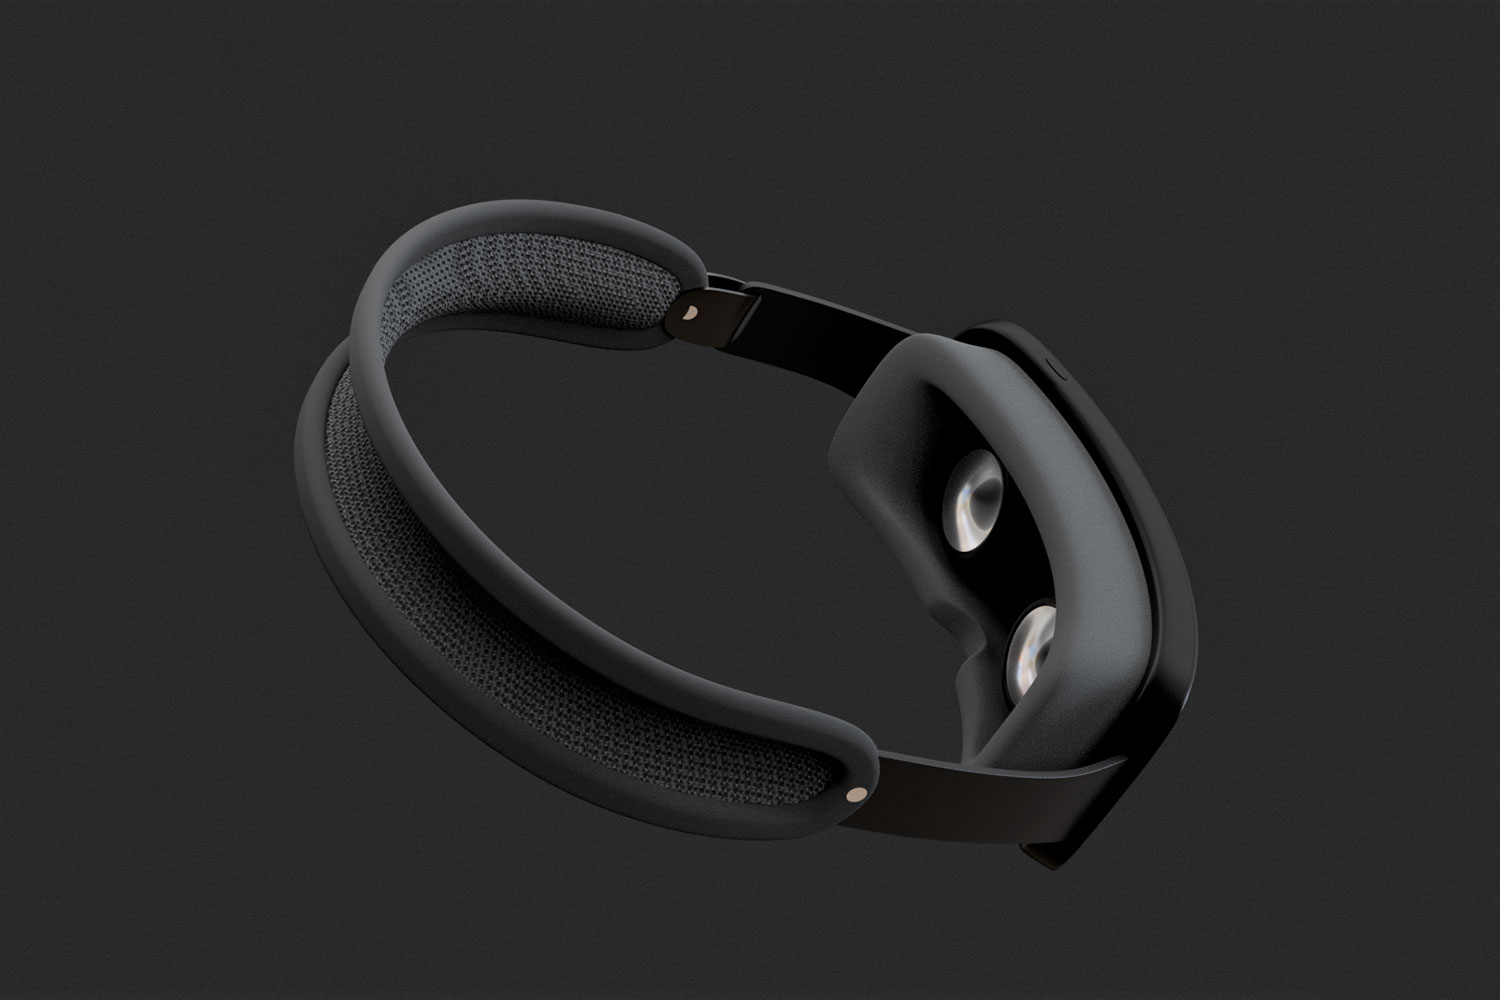 A rendering of an Apple mixed-reality headset (Reality Pro) in a black color seen from behind.